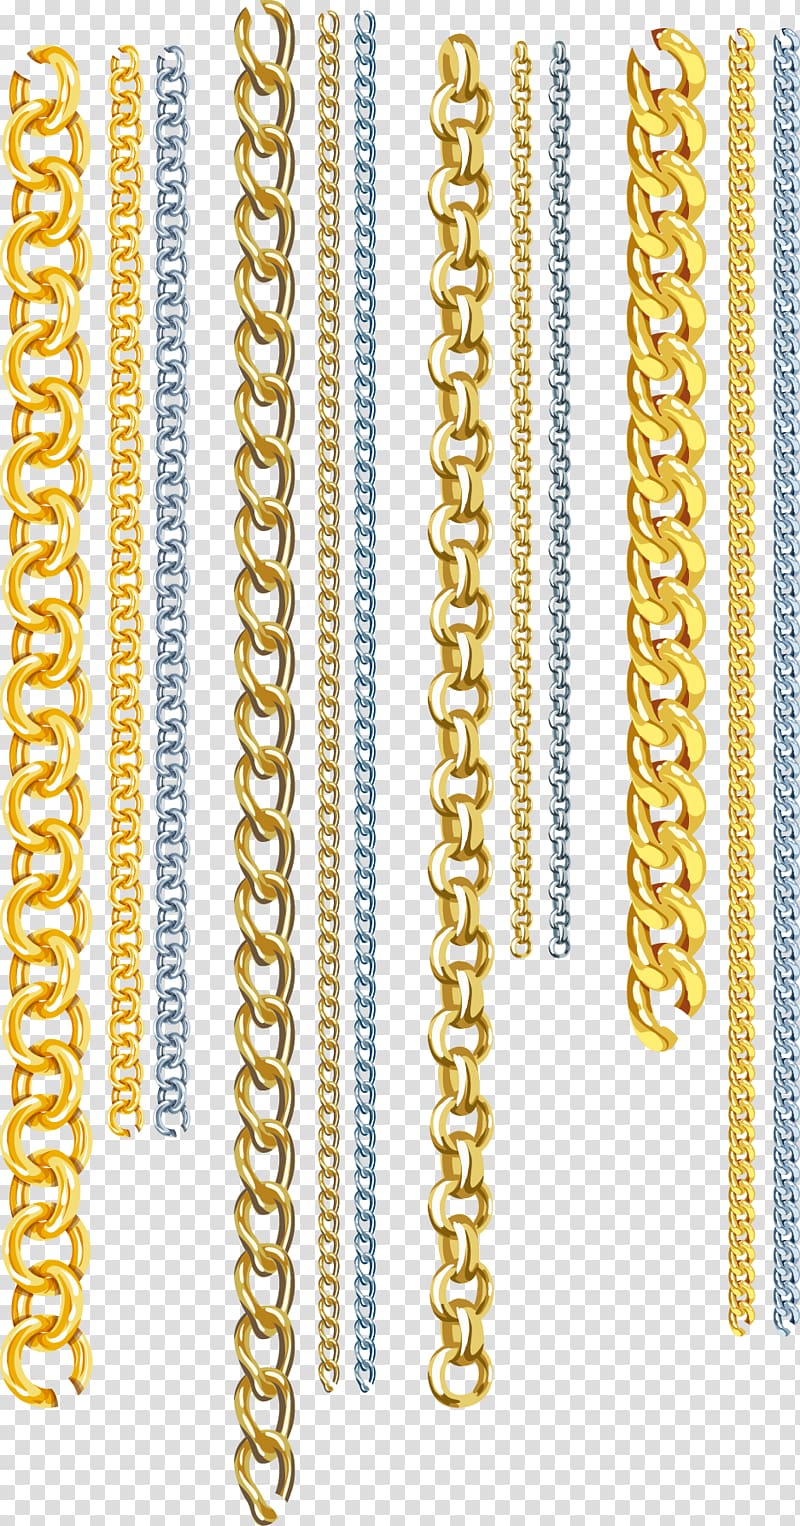 brass-colored chain lot, Gold Euclidean Chain, chains transparent background PNG clipart